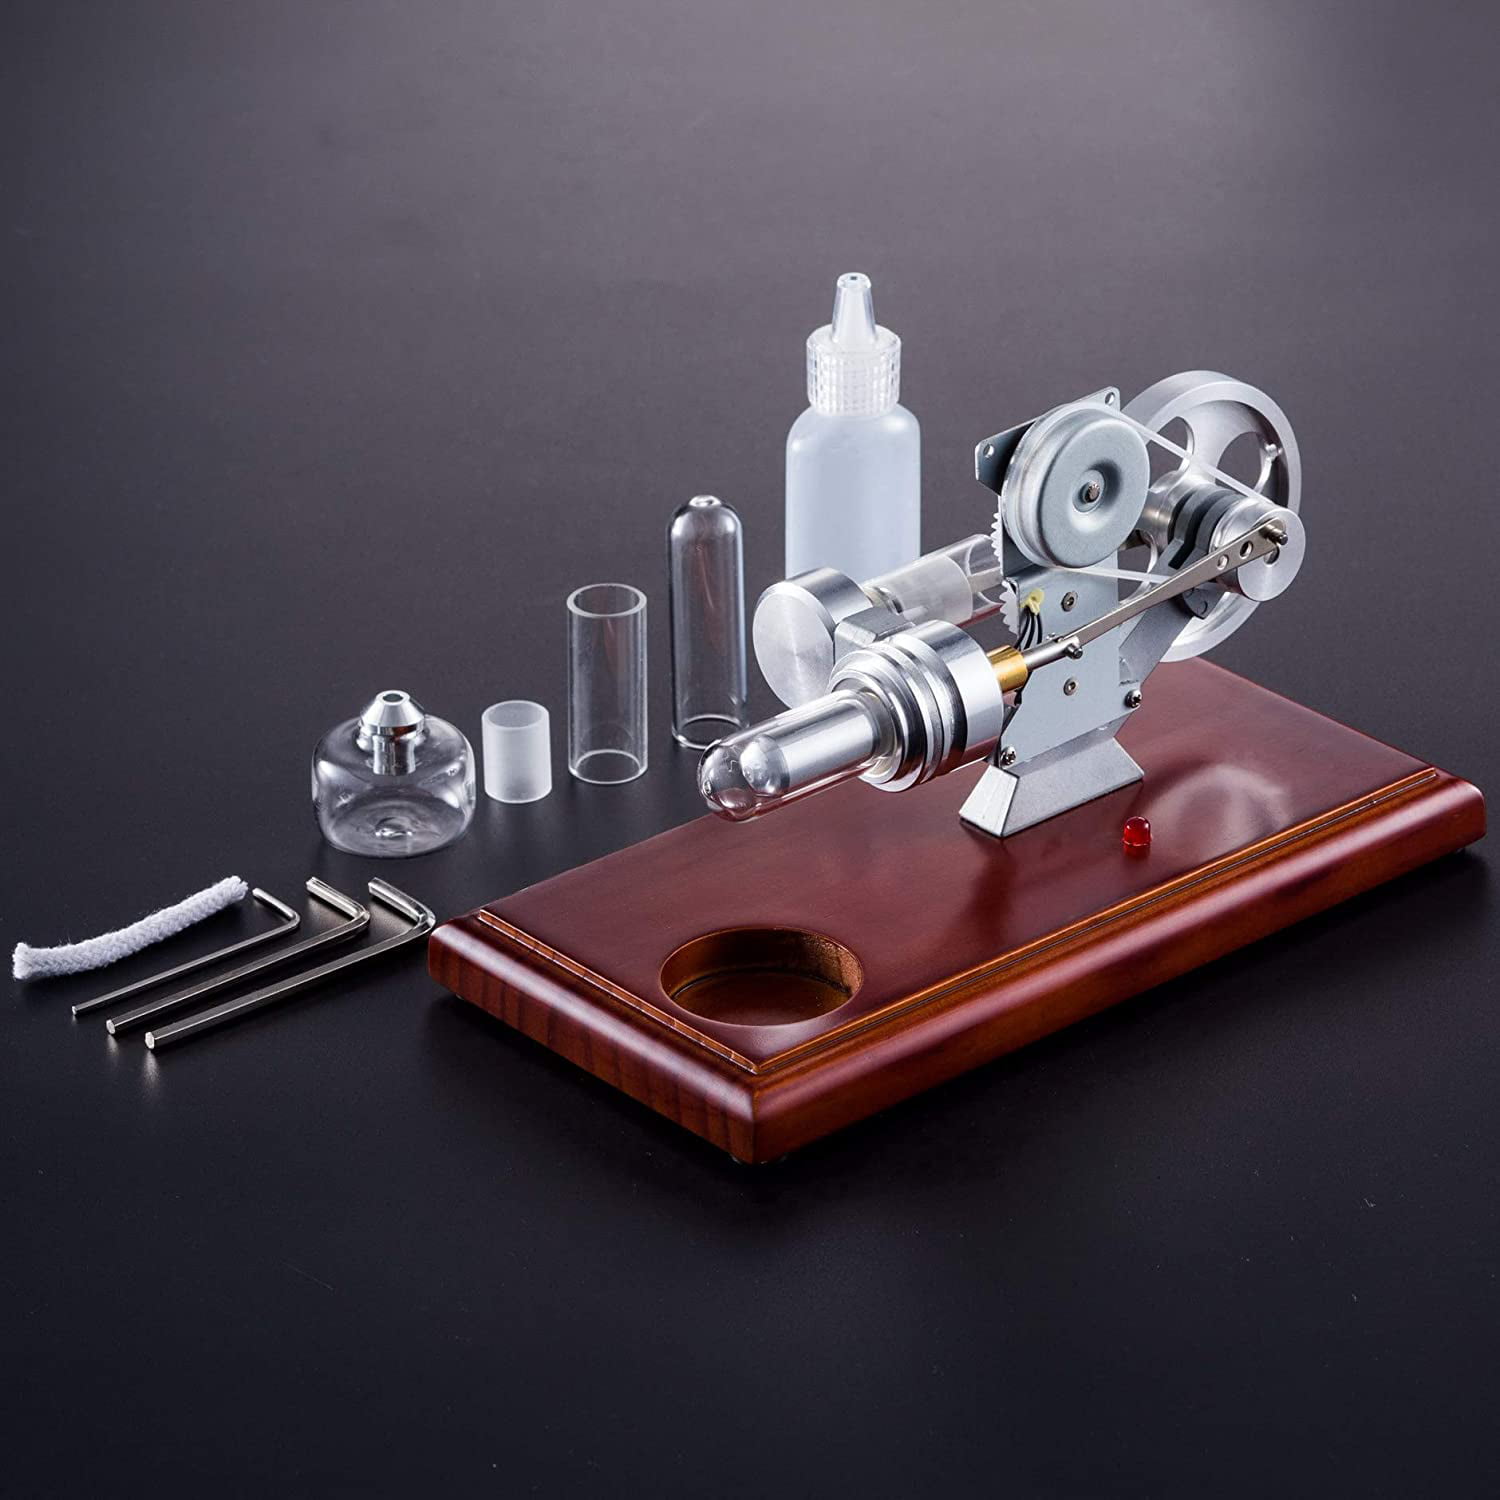 Hot Air Stirling Engine Education Toy Electricity Power LED Generator FD03 G 